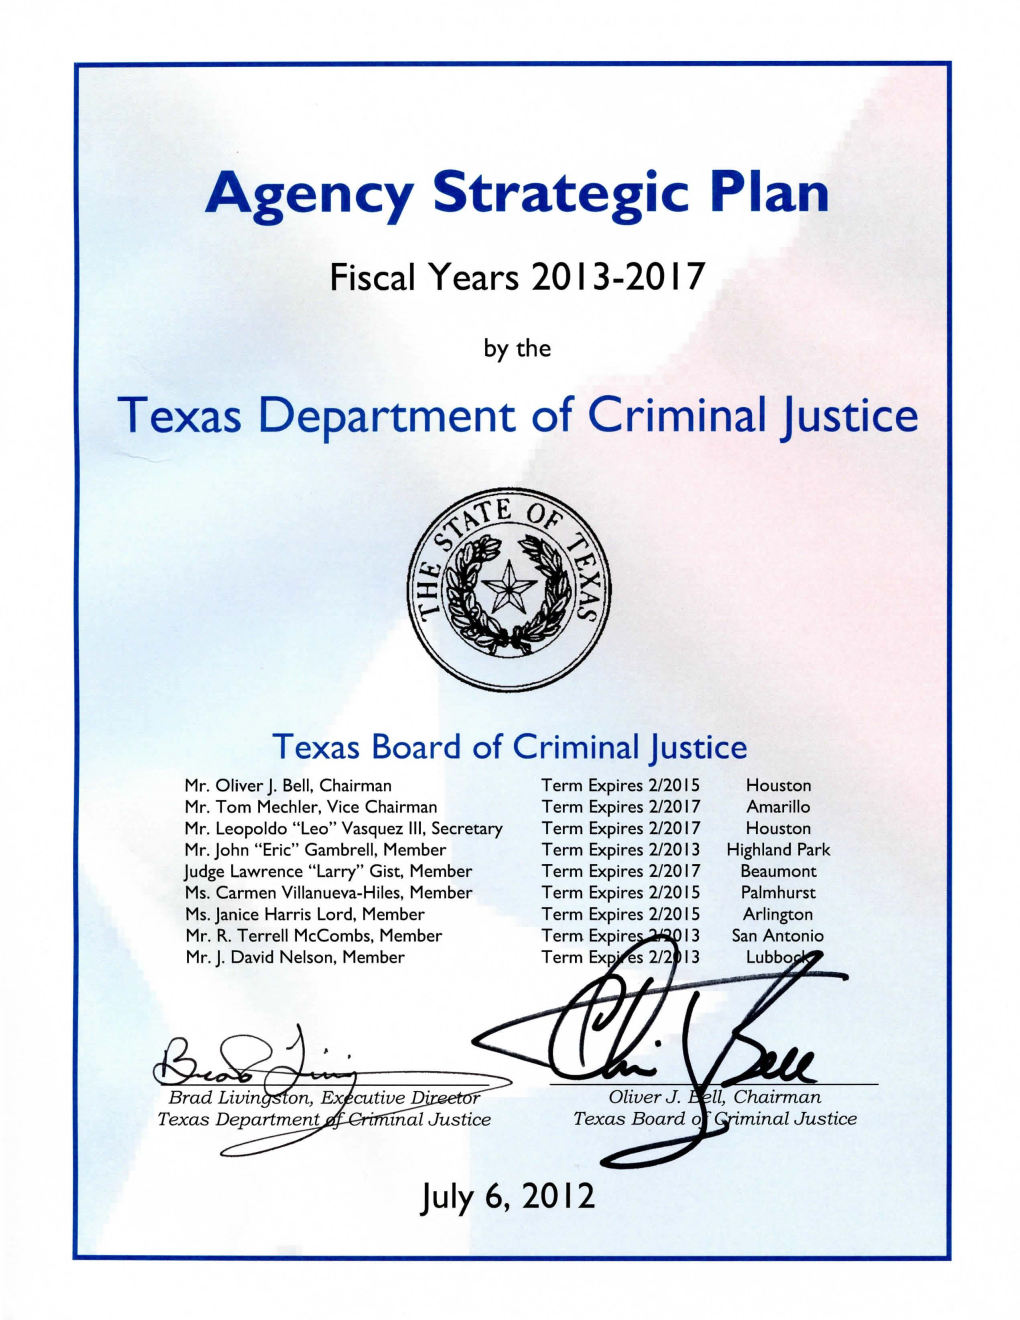 Agency Strategic Plan for Fiscal Years 2013-2017